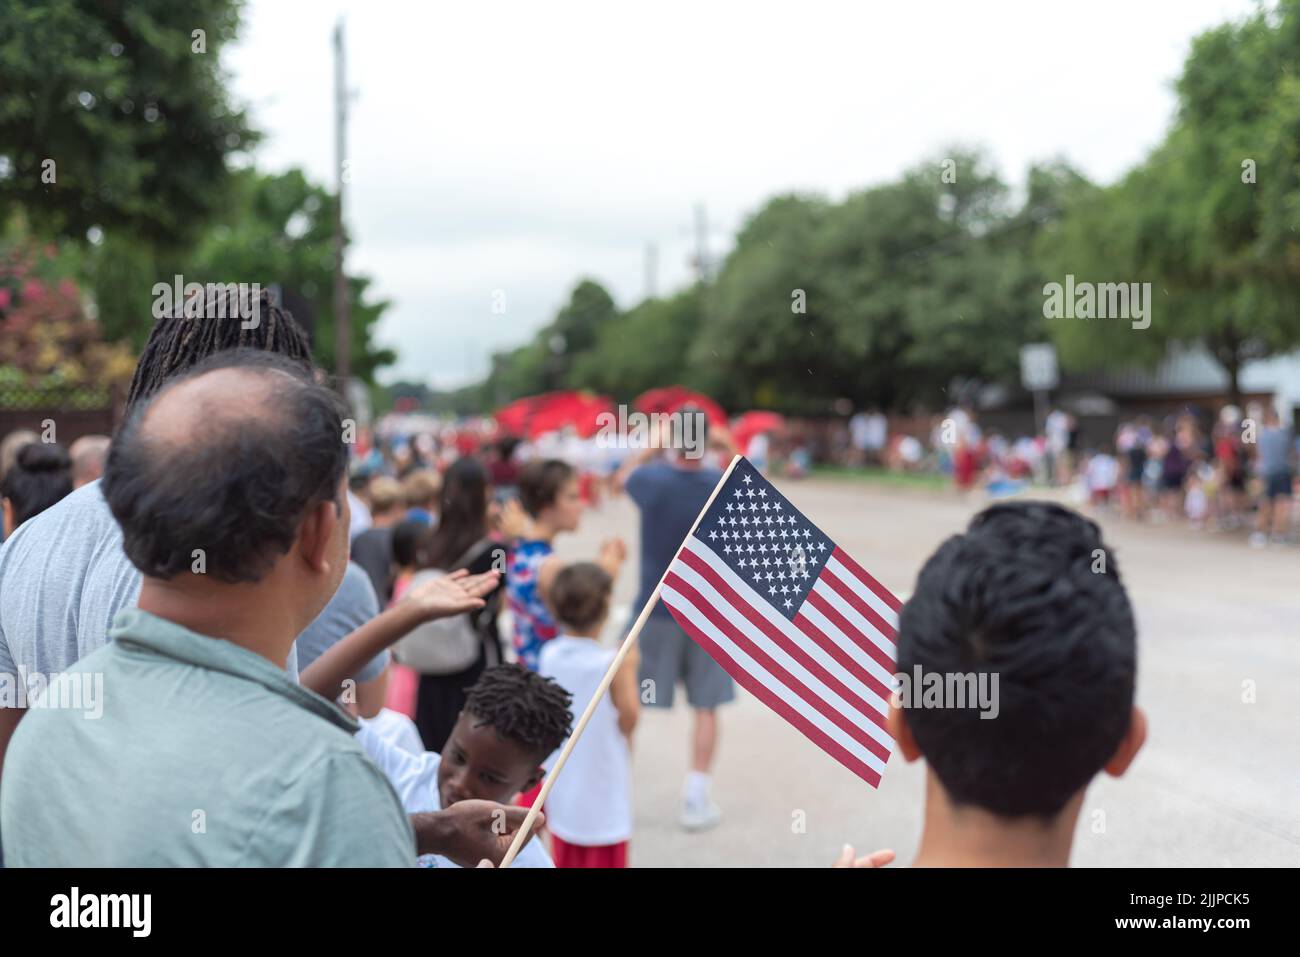 Diverse people waving American flags watching street parade on July 4th Independence Day celebration Stock Photo